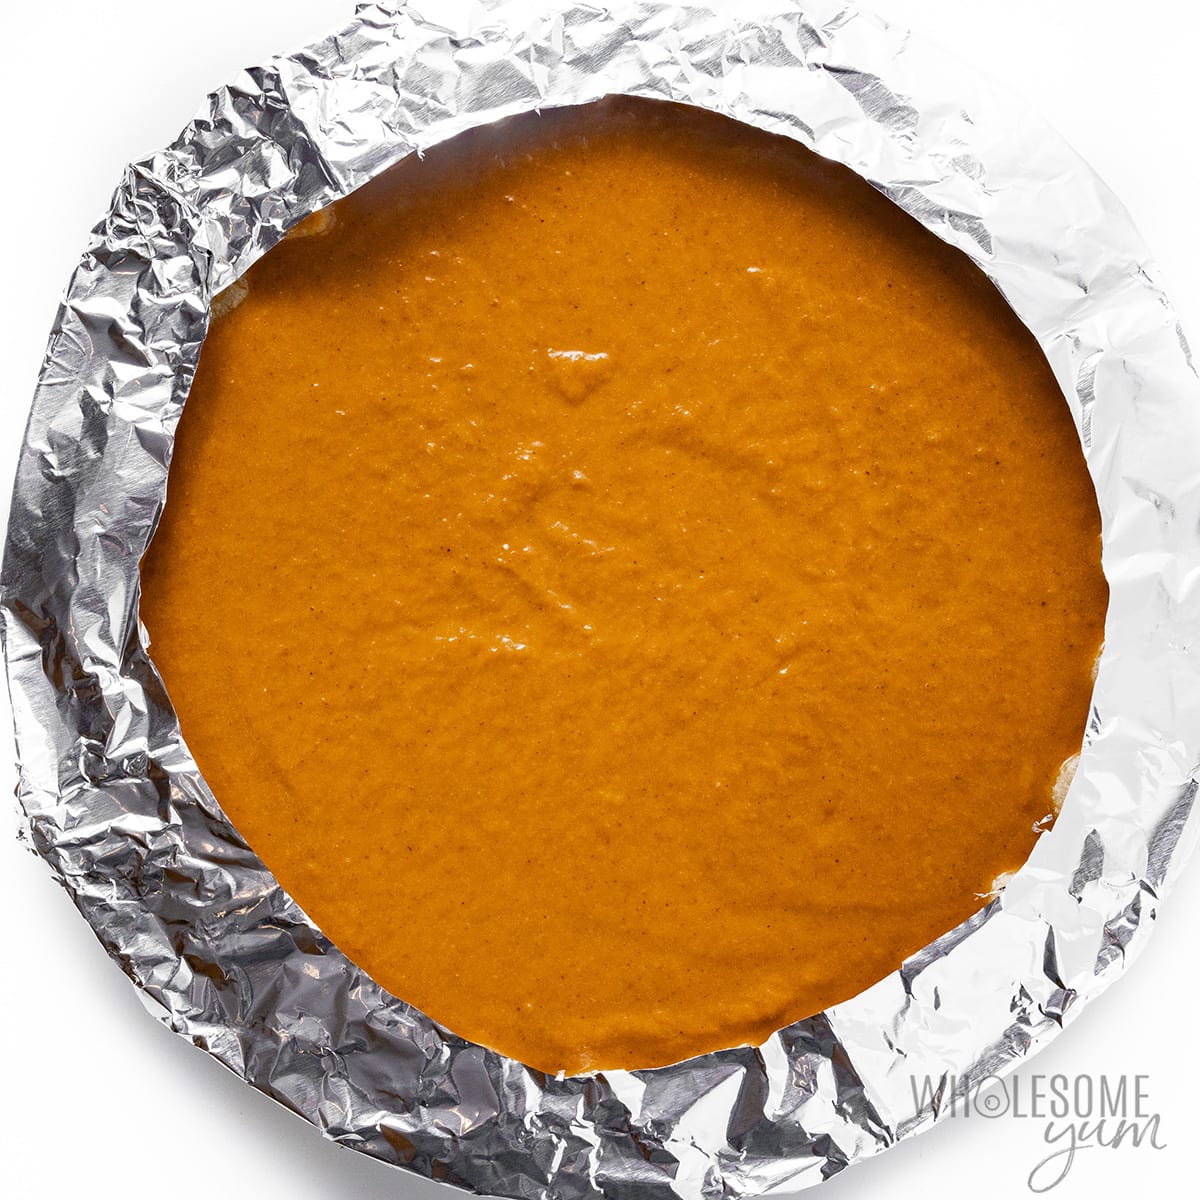 Low carb pumpkin pie with foil around the edges.